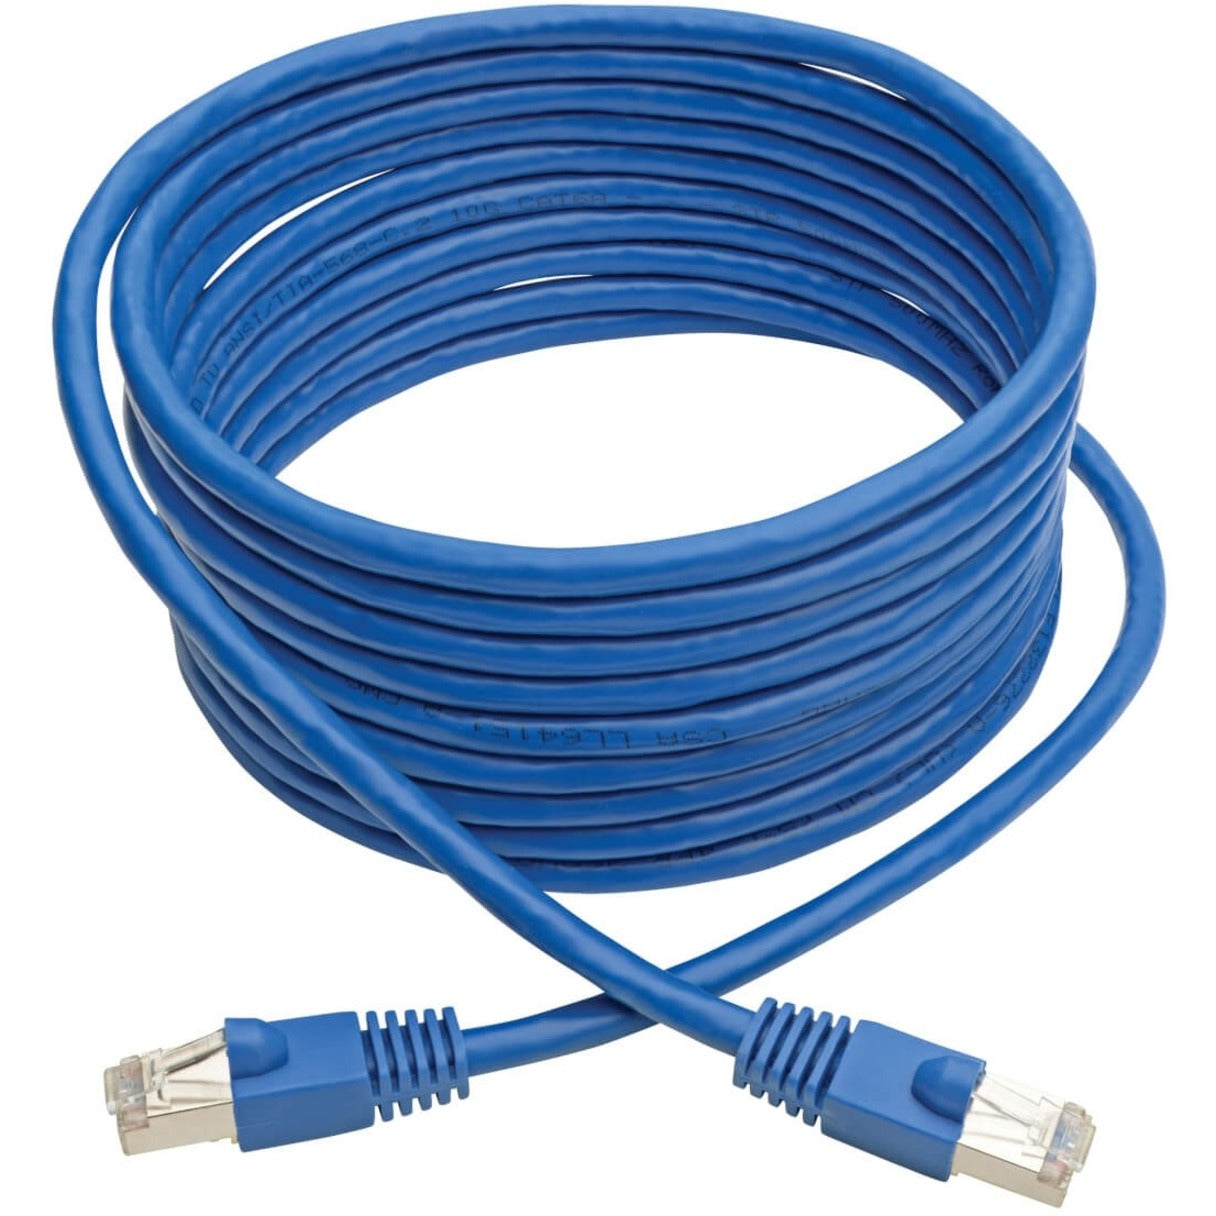 Tripp Lite N262-015-BL Cat.6a STP Patch Network Cable, 15 ft, Blue, 10G-Certified